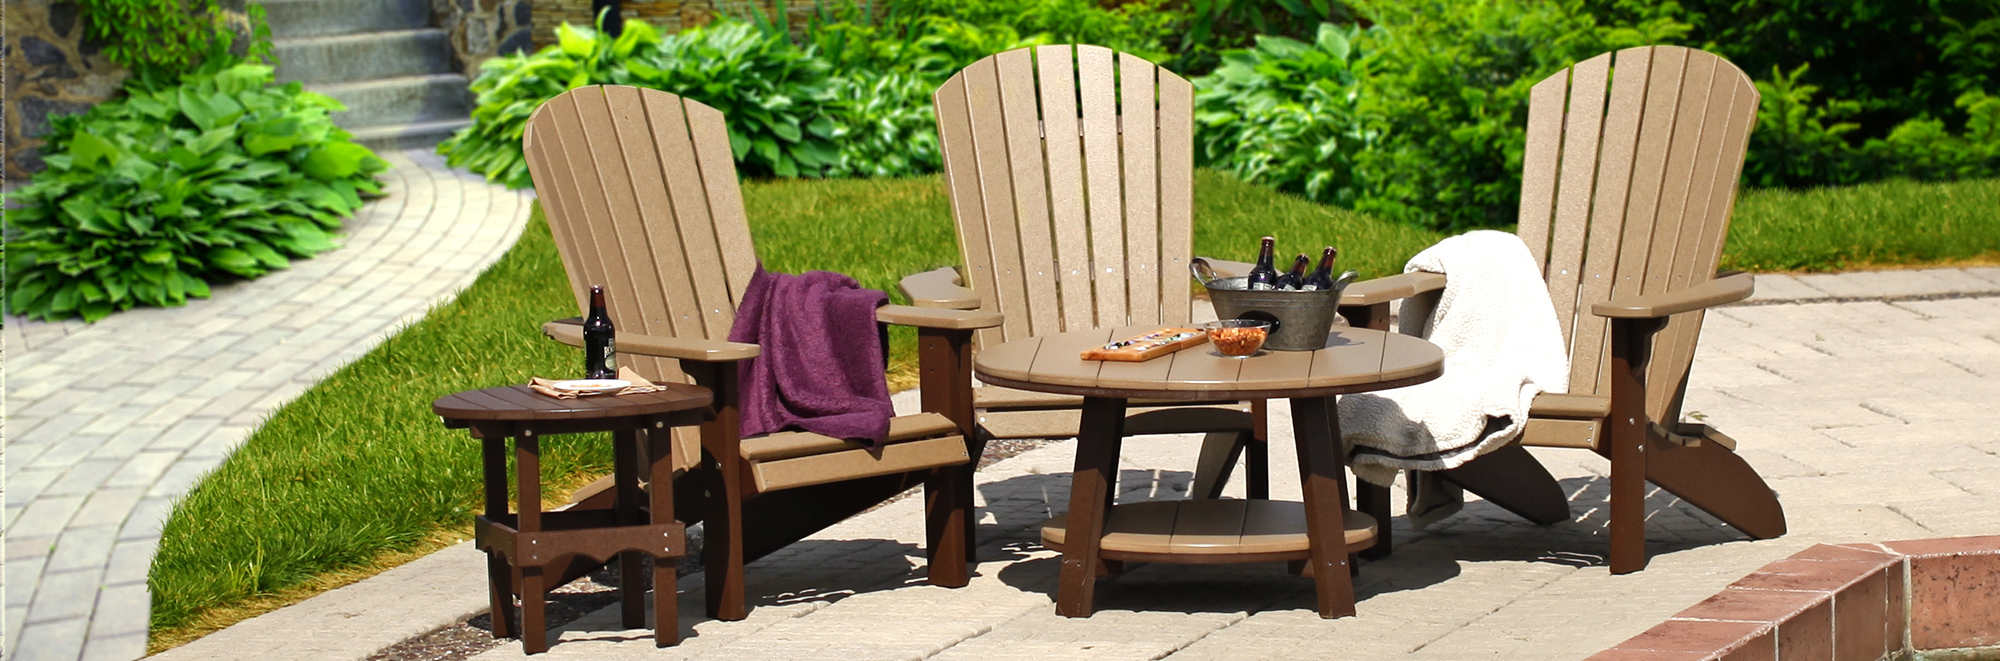 Adirondack chairs with center table